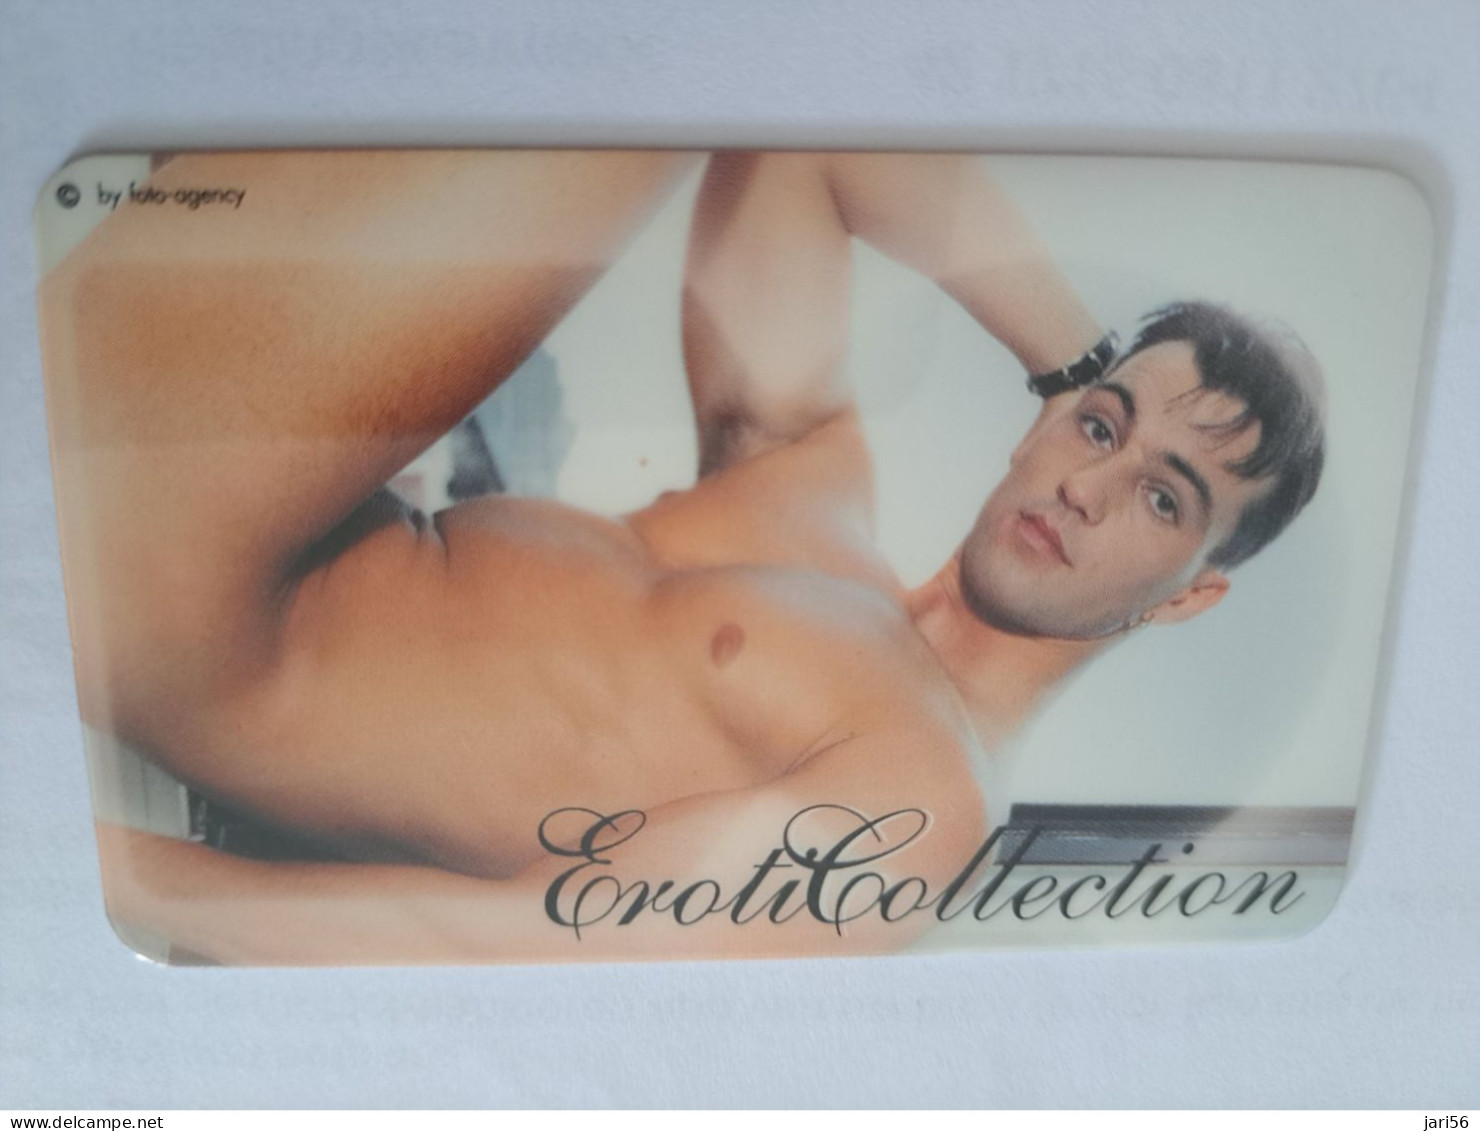 GREAT BRITAIN /20 UNITS / EROTIC COLLECTION / MODEL / NAKED MAN  / (date 09/00)  PREPAID CARD / MINT  **14305** - [10] Colecciones